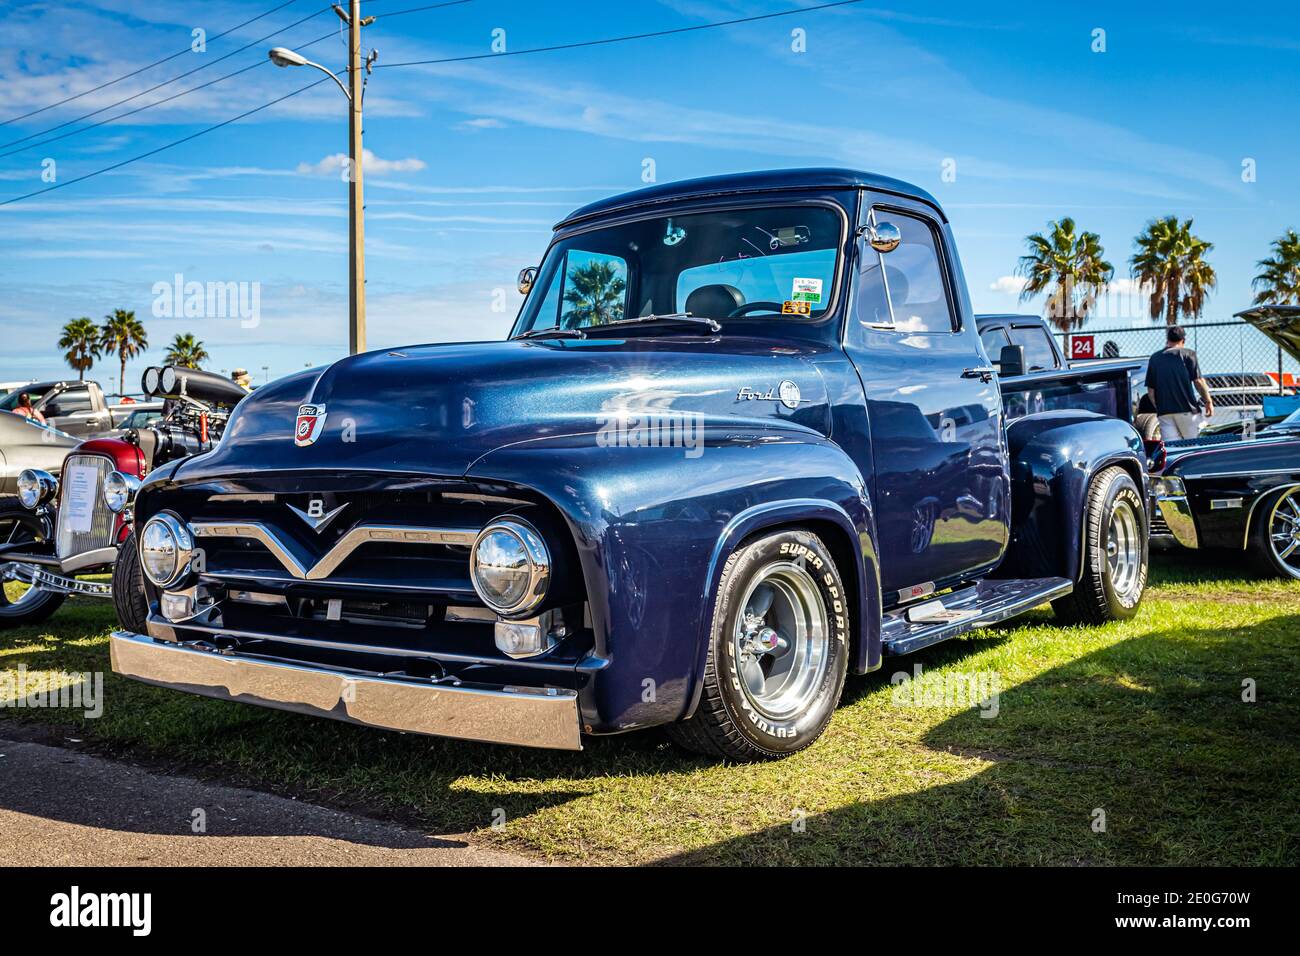 1955 Ford Pickup Truck High Resolution Stock Photography and Images - Alamy